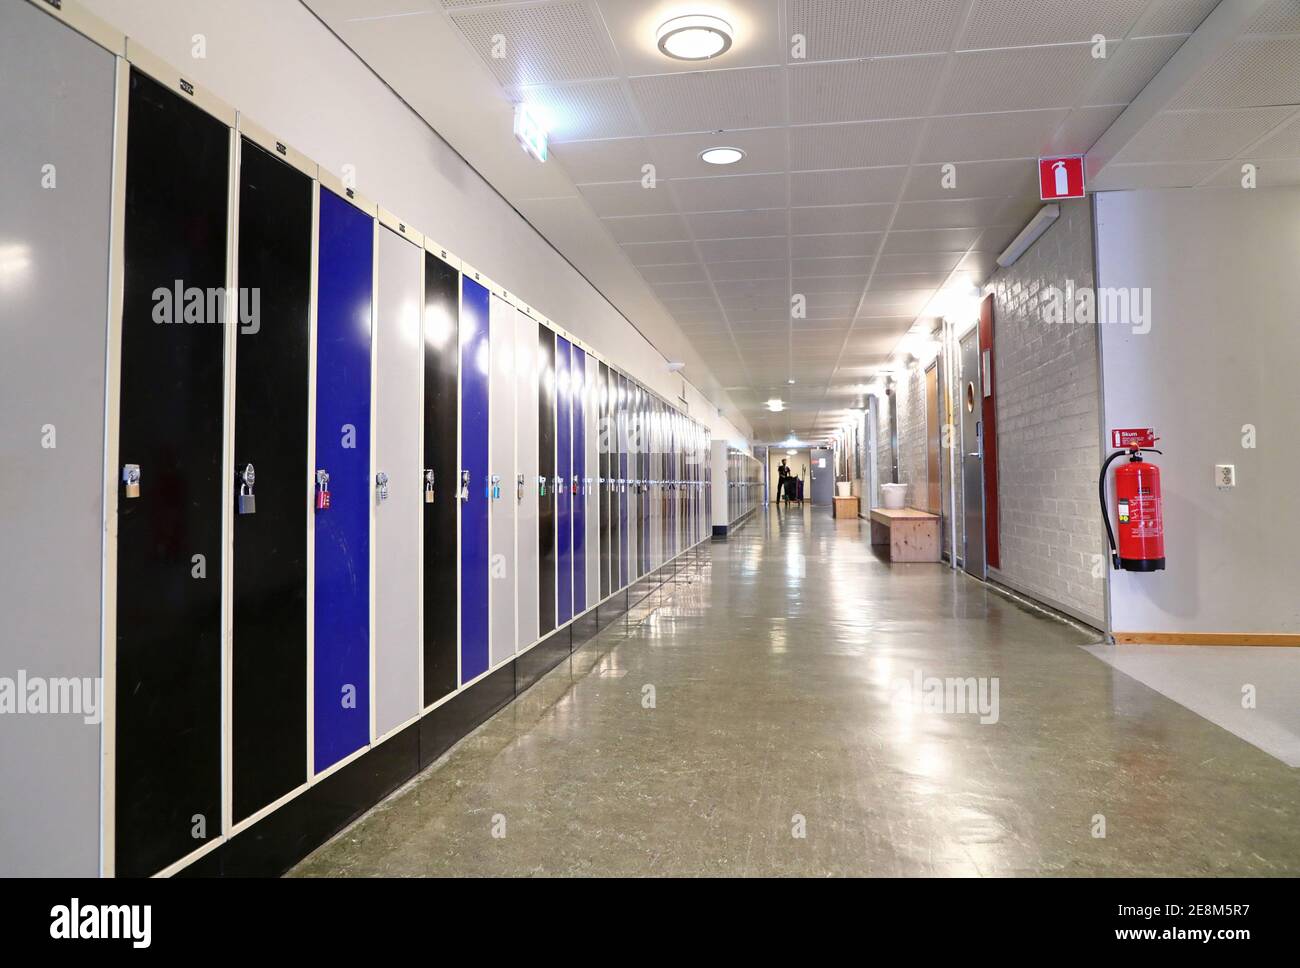 MOTALA, SWEDEN- 18 MARCH 2020:Deserted corridors and classrooms at Platengymnasiet during Wednesday. All teaching in upper secondary school and above shall be conducted from a distance, starting Wednesday. This is because of the corona virus. Stock Photo